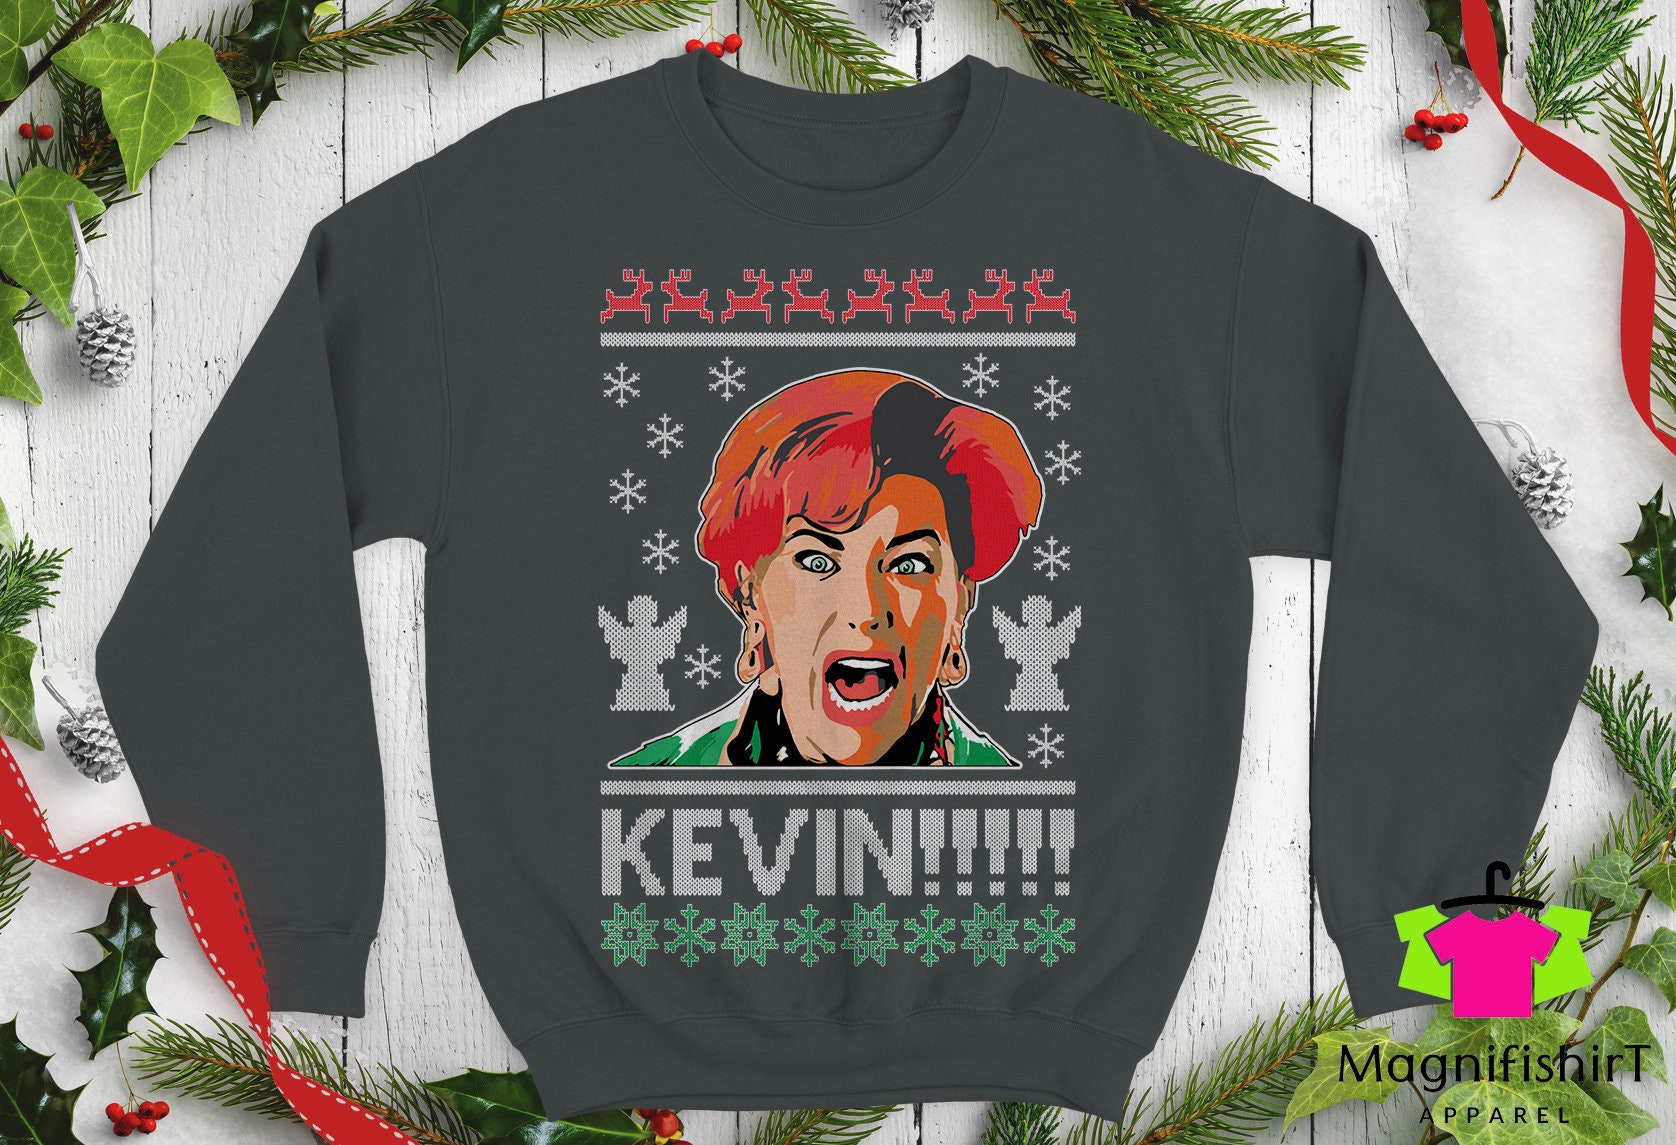 Discover Kevin!!!! Ugly Christmas Sweater. Unisex Funny home alone kate Parody xmas movies party gift Crewneck sweatshirts